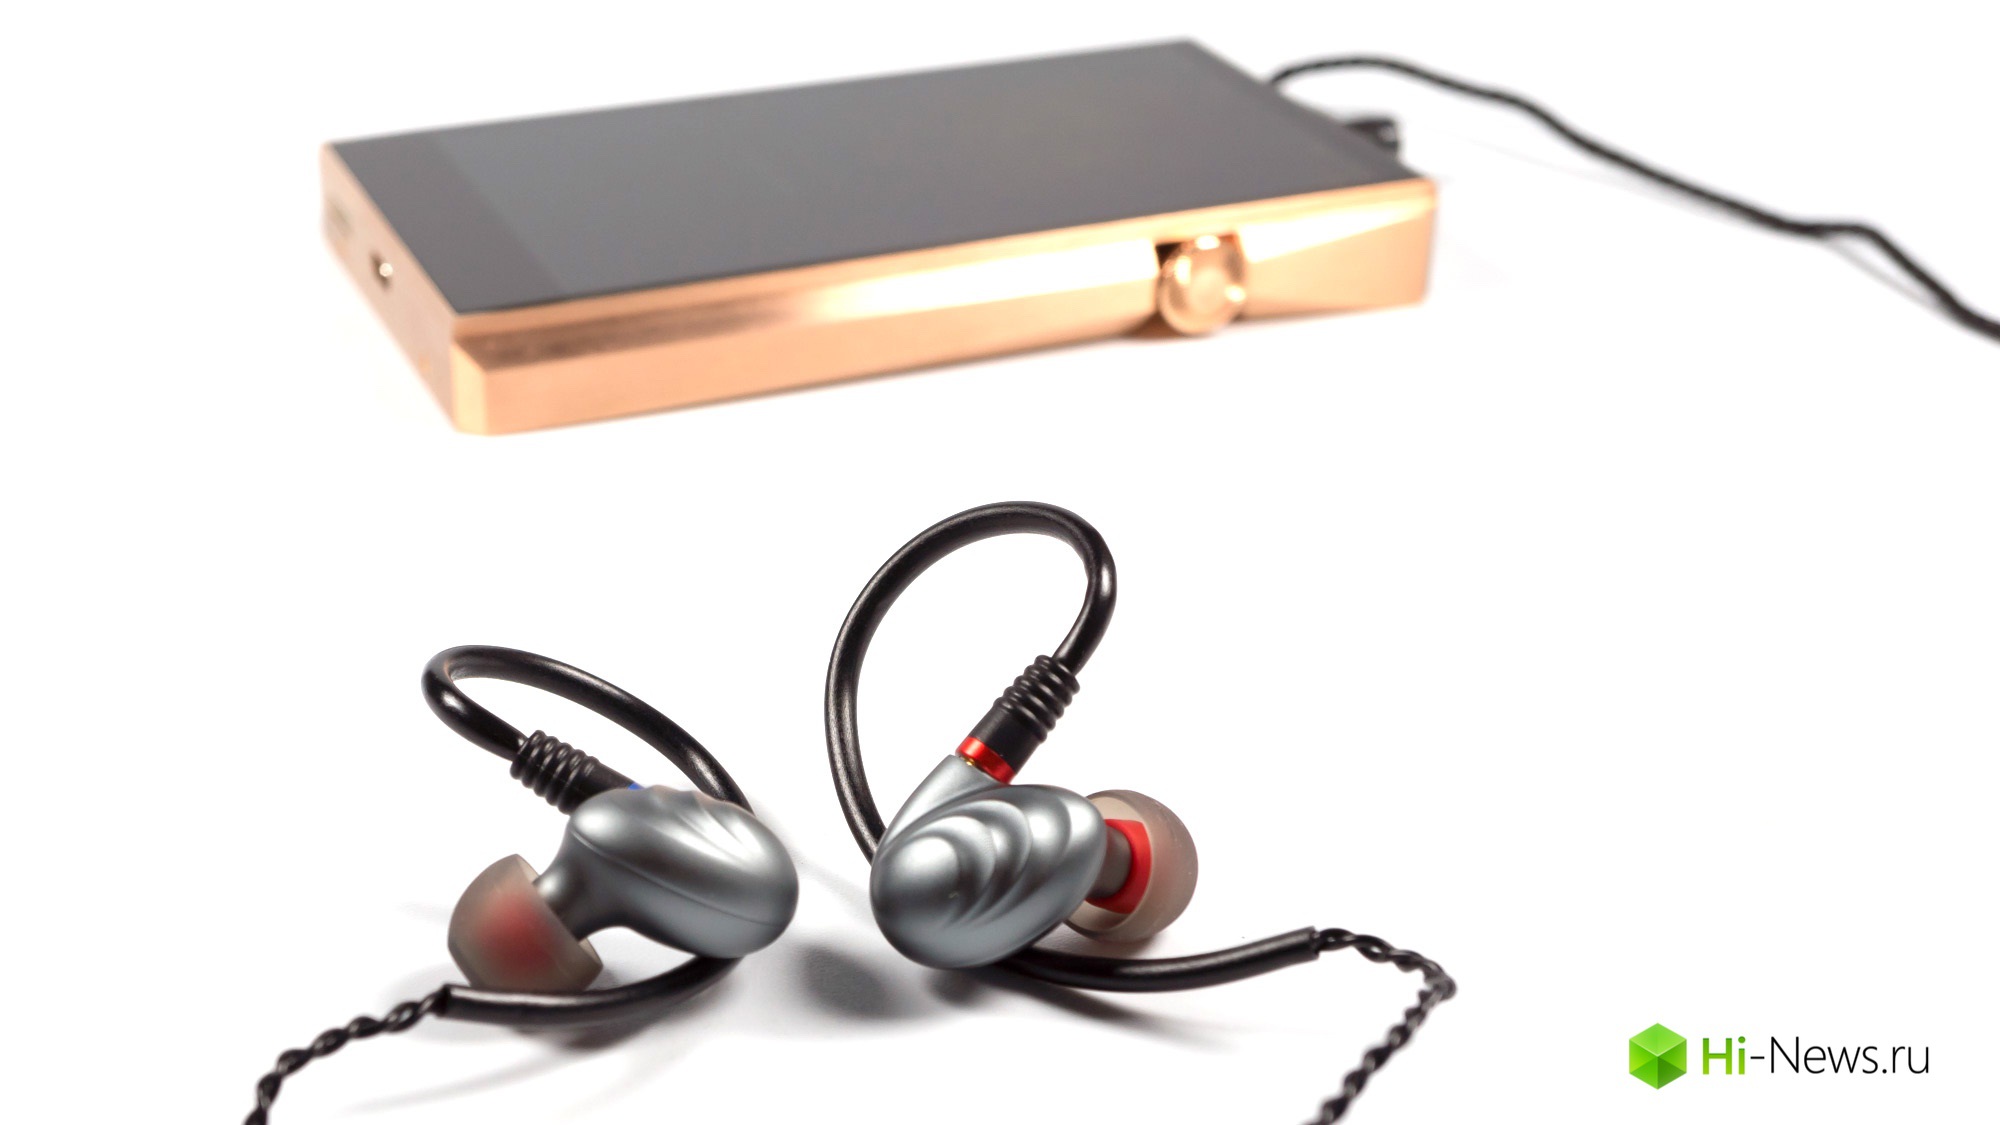 Overview headphones FiiO F9 Pro is the strengthening of the position of